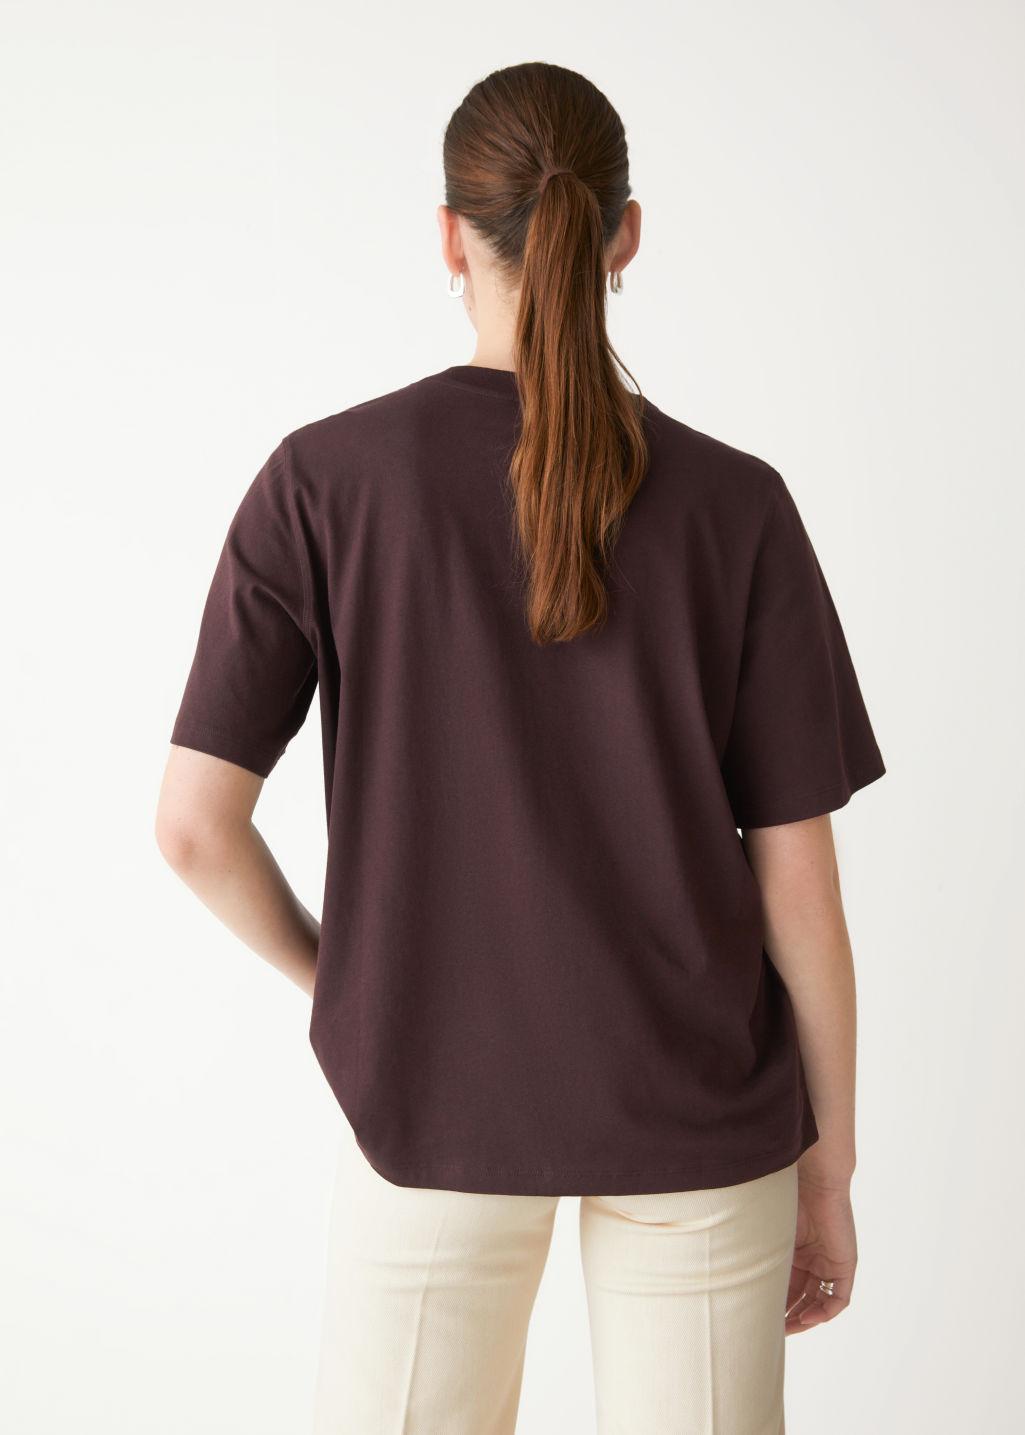 Other Stories Sleeve Crewneck T-shirt in Brown | Lyst